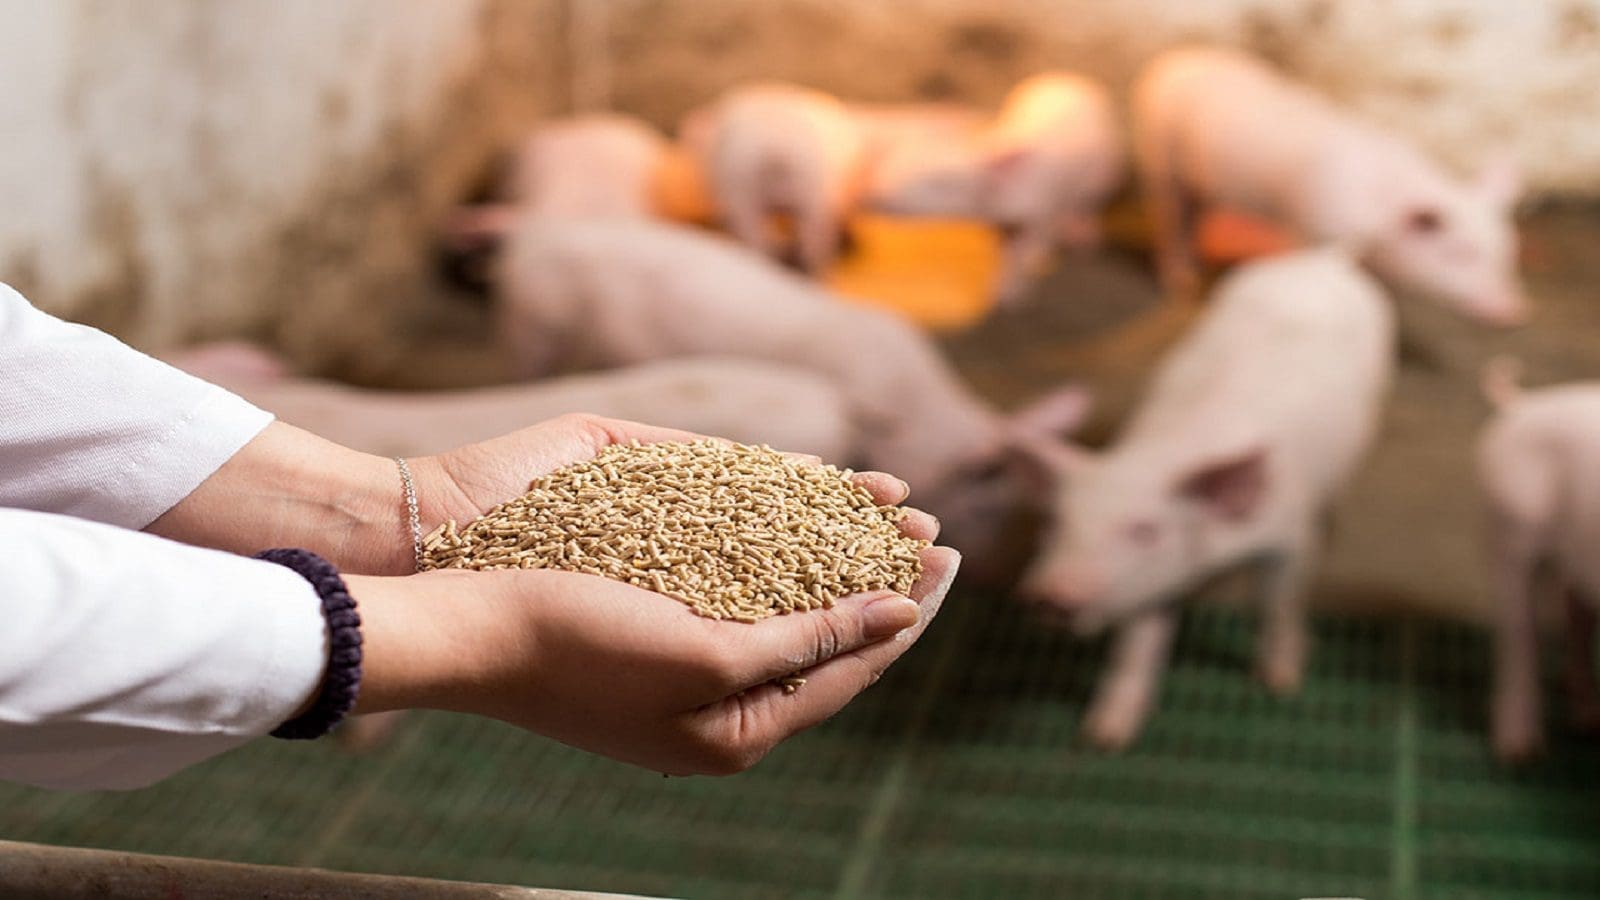 Cargill, ADM issue recalls on animal feed products